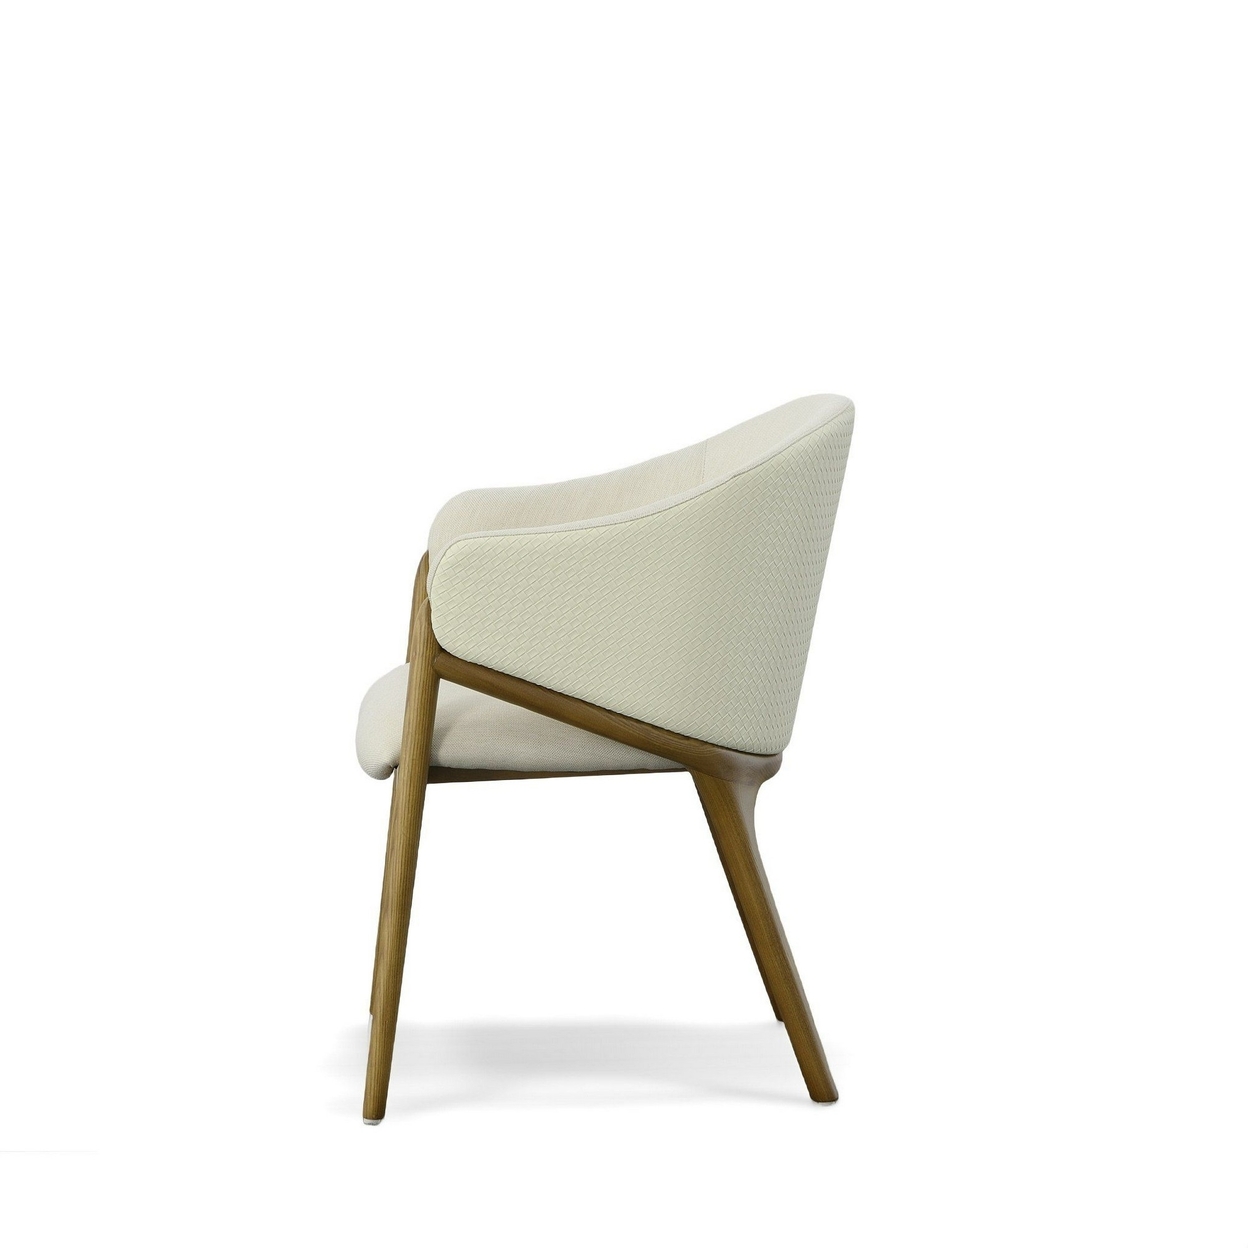 22 Inch Dining Chair, Cream Fabric Upholstery, Curved Backrest, Solid Wood- Saltoro Sherpi